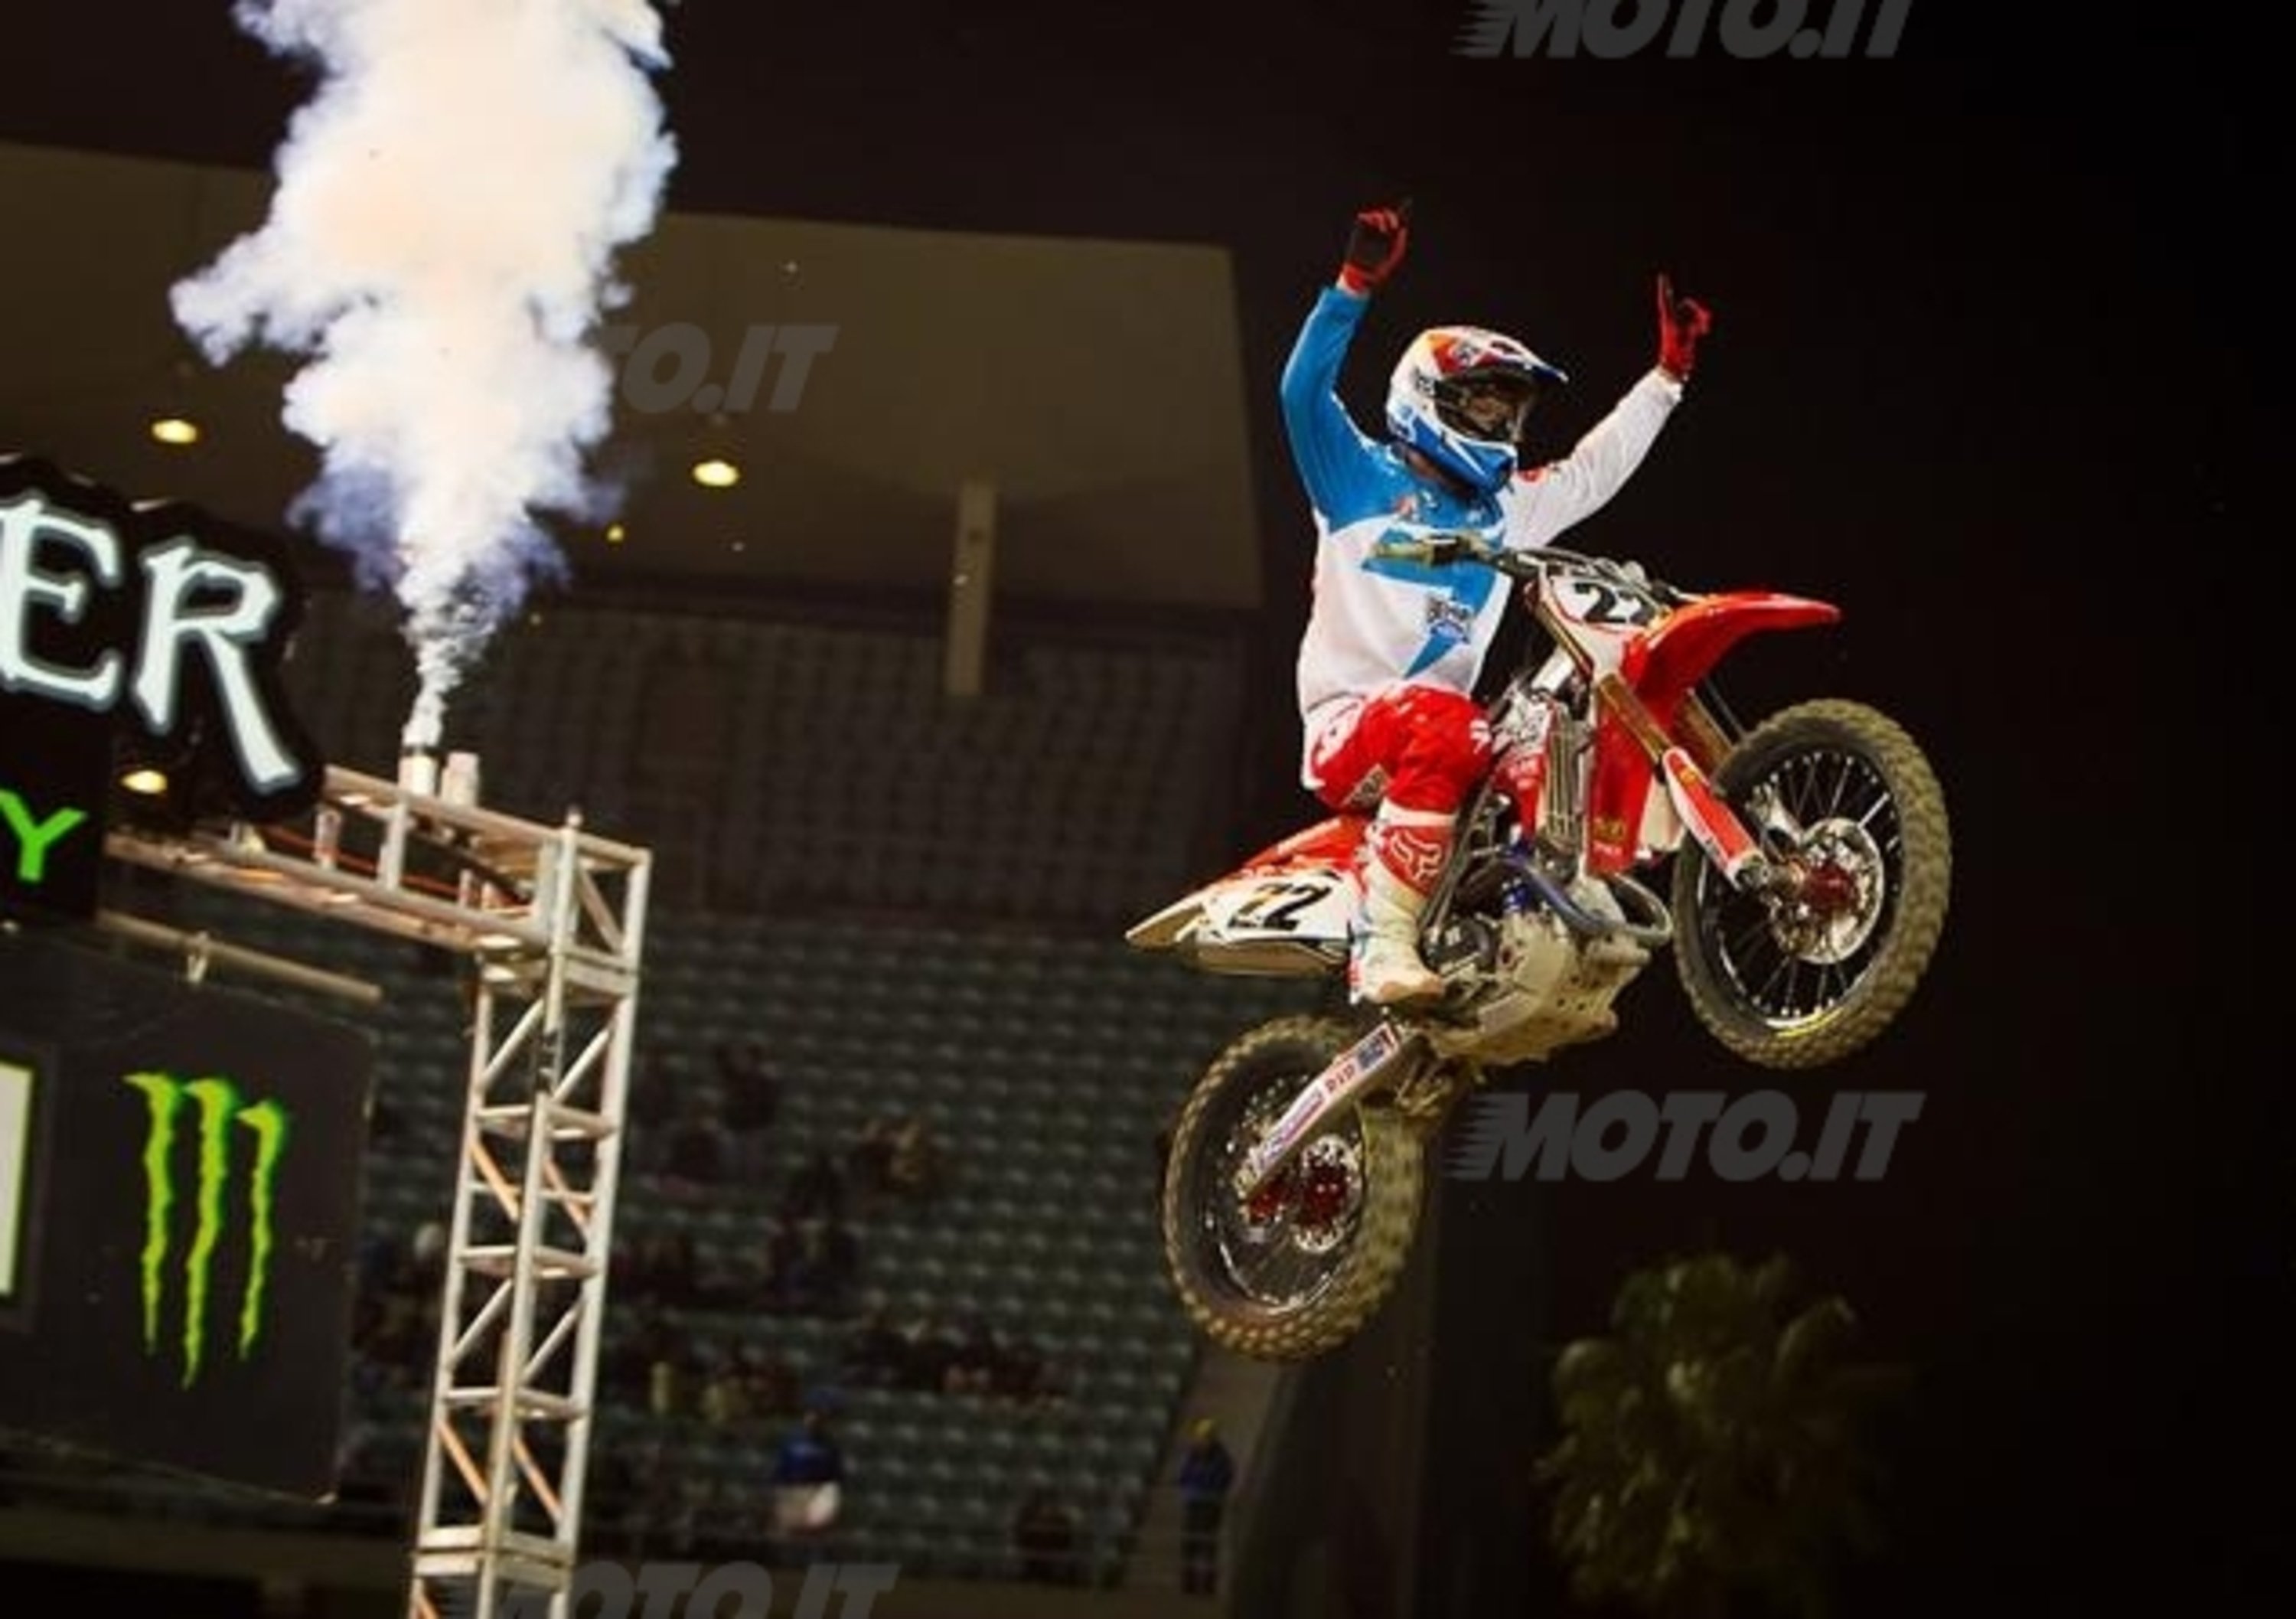 A Los Angeles vince Reed. Dungey ancora leader in classifica